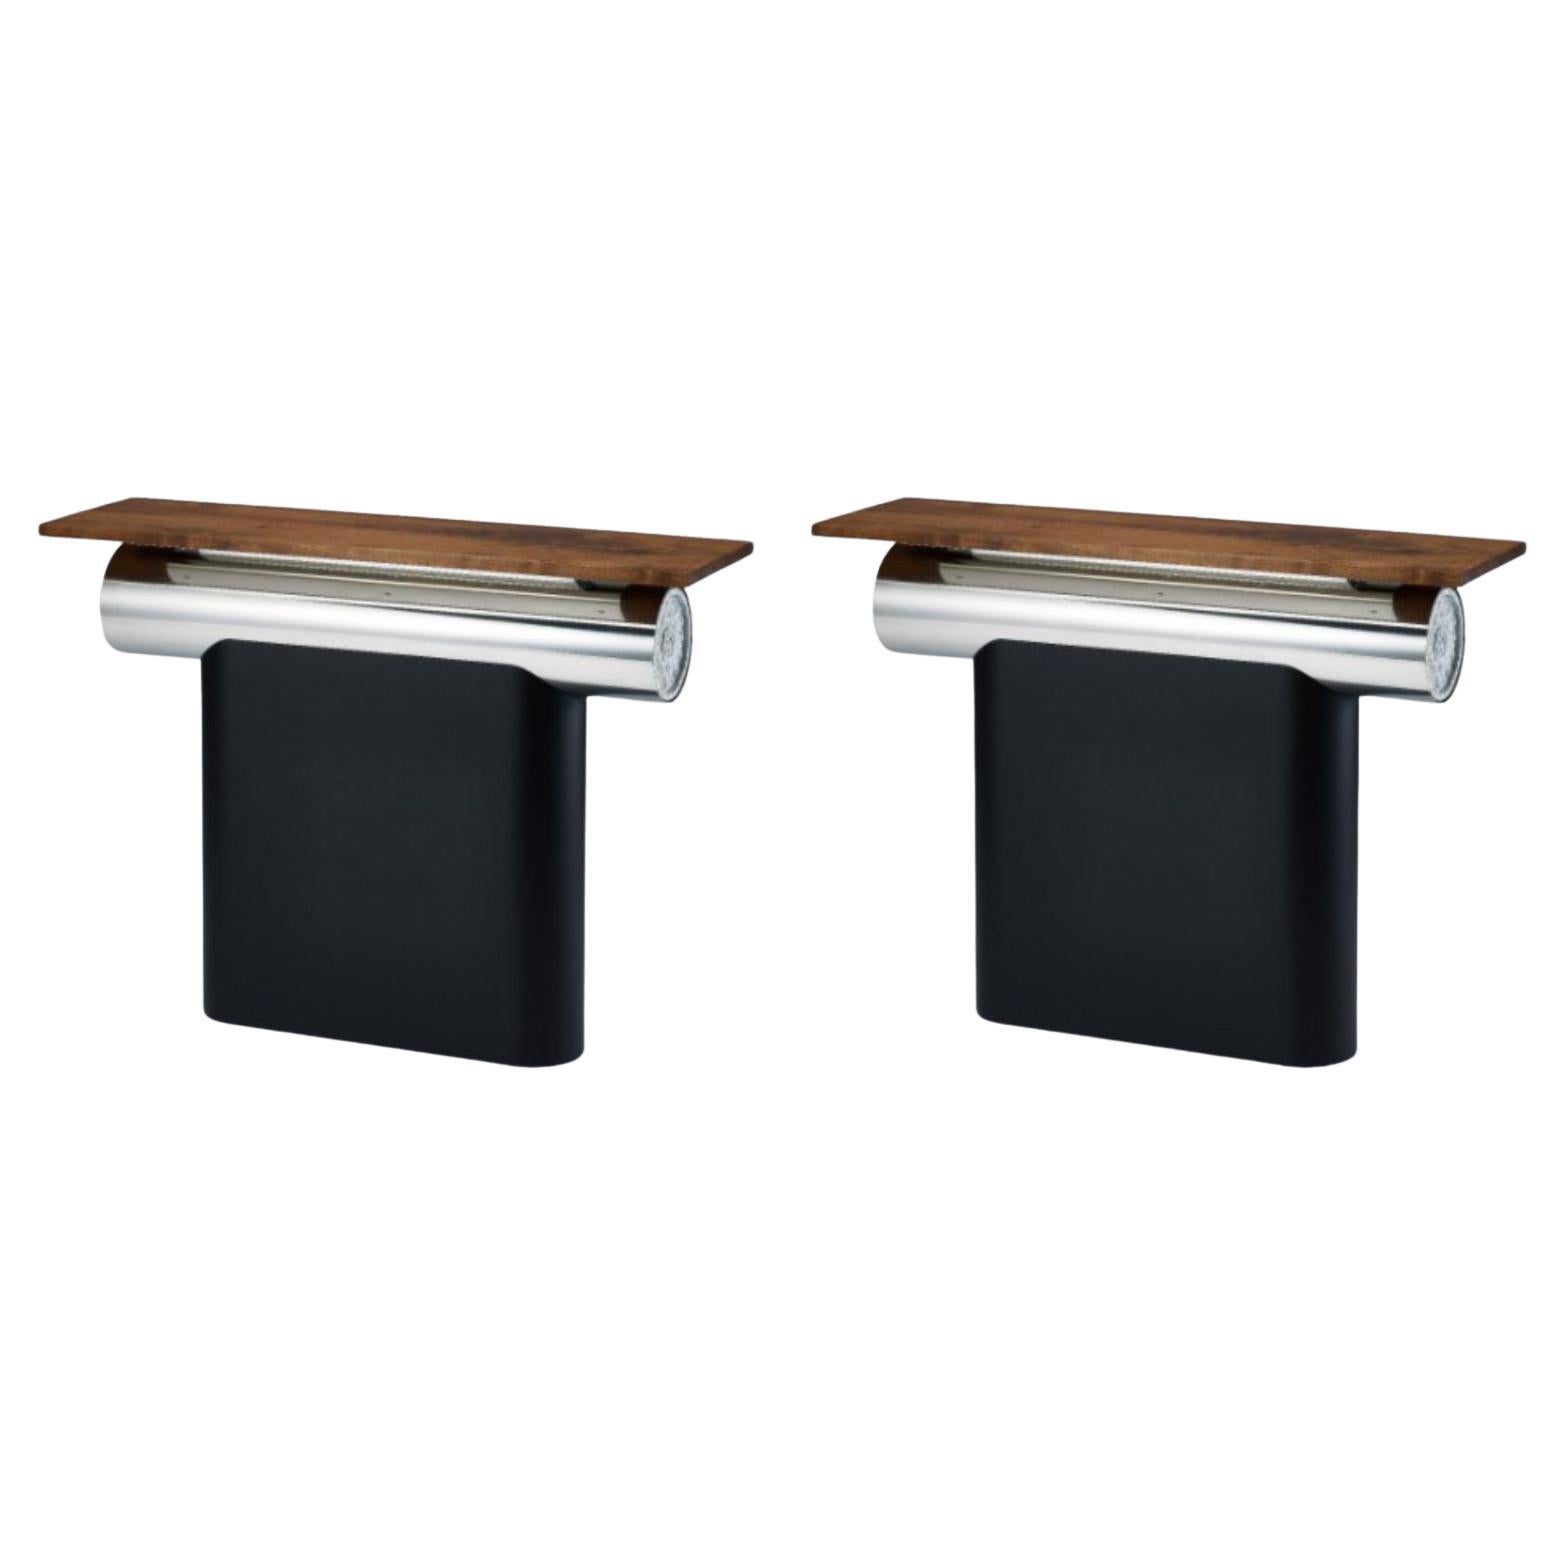 Set of 2 Heritage Gwol Console Tables by Lee Jung Hoon